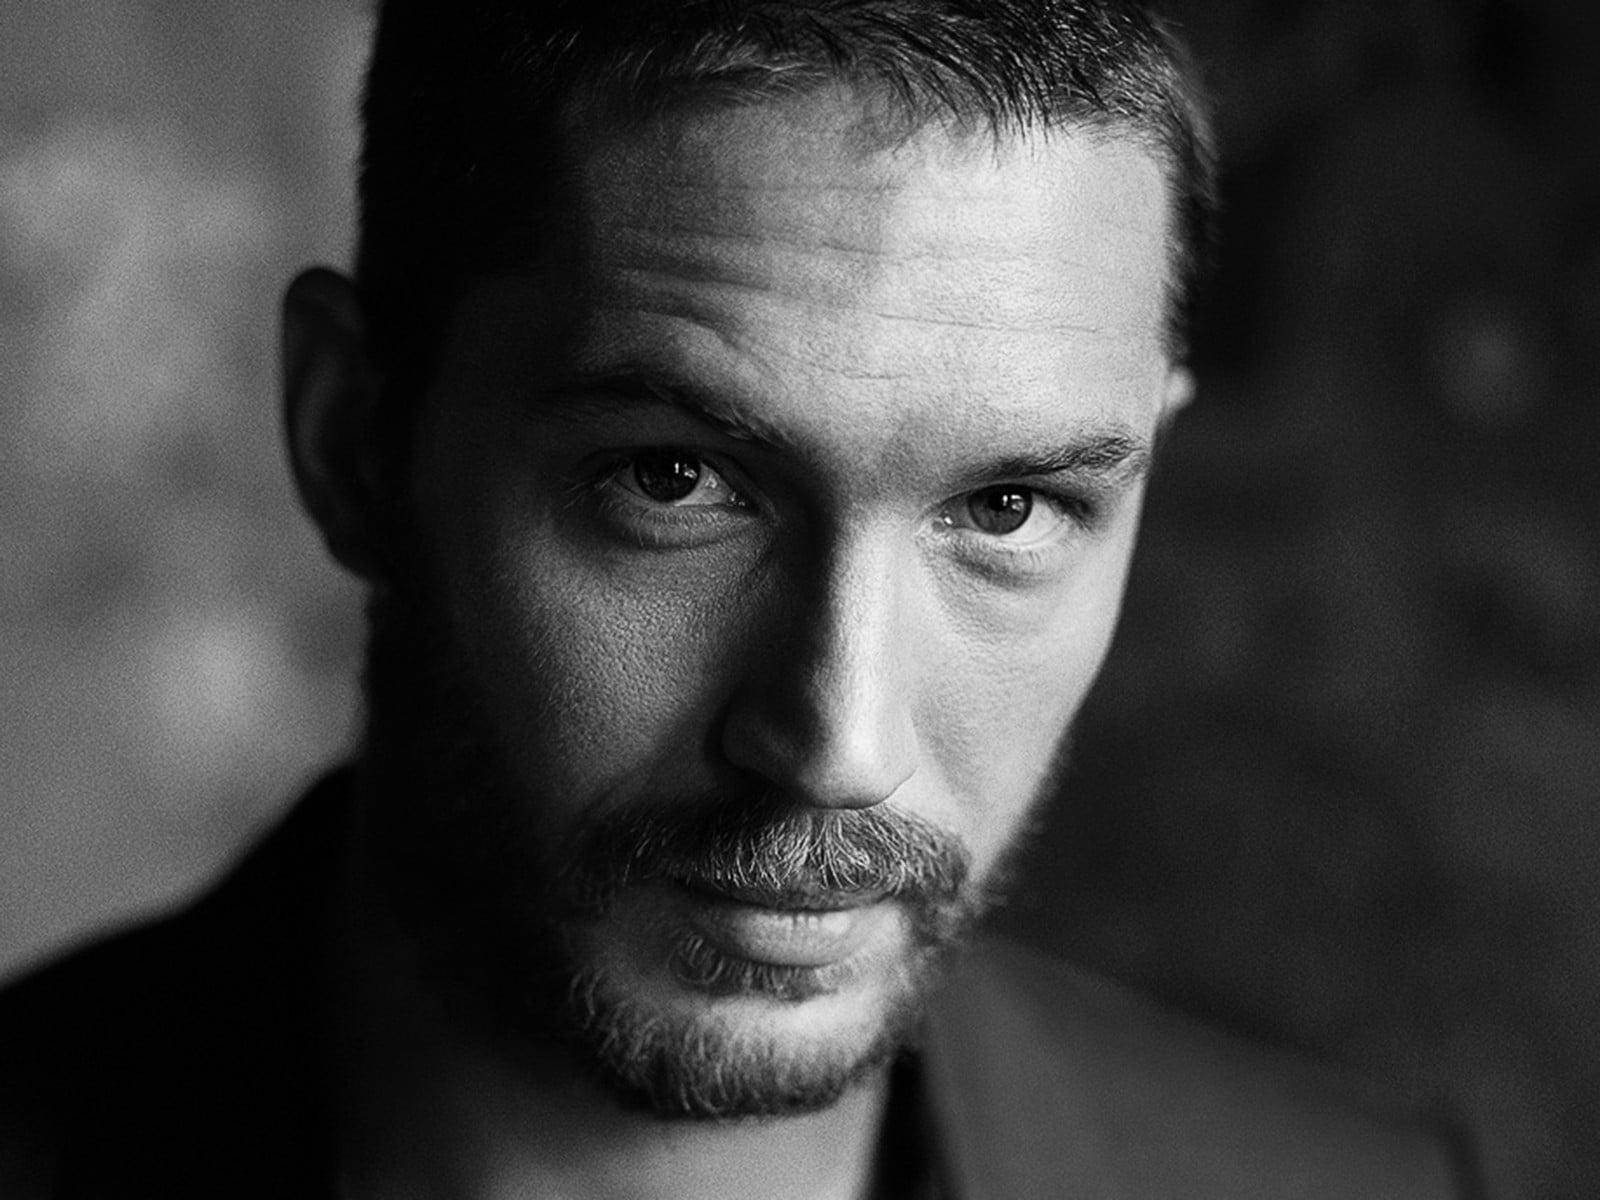 Tom Hardy's Face In Monochrome Background